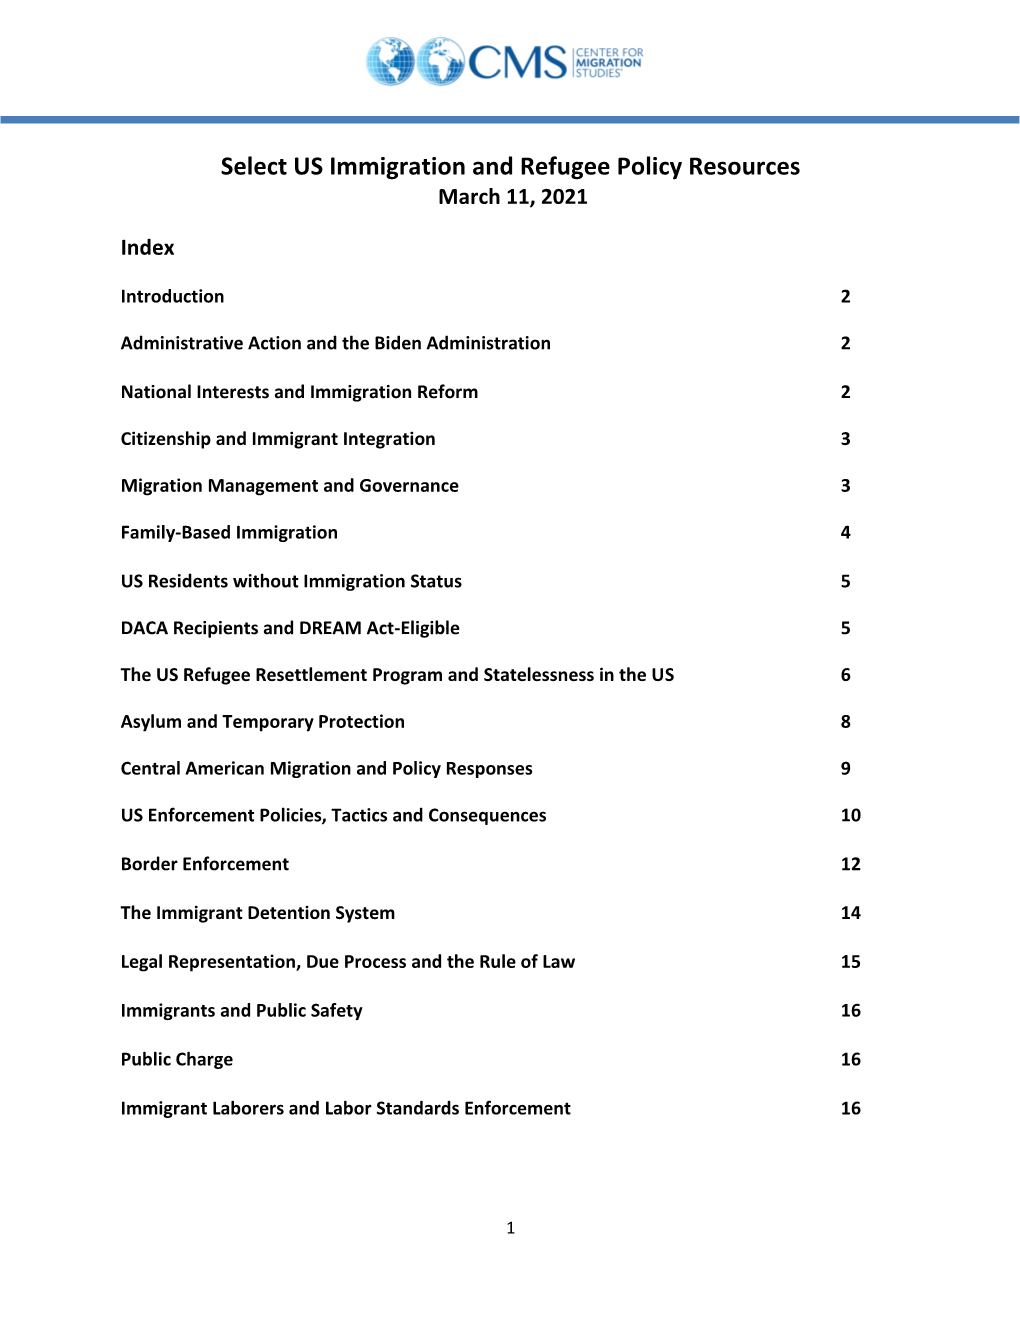 Select US Immigration and Refugee Policy Resources March 11, 2021